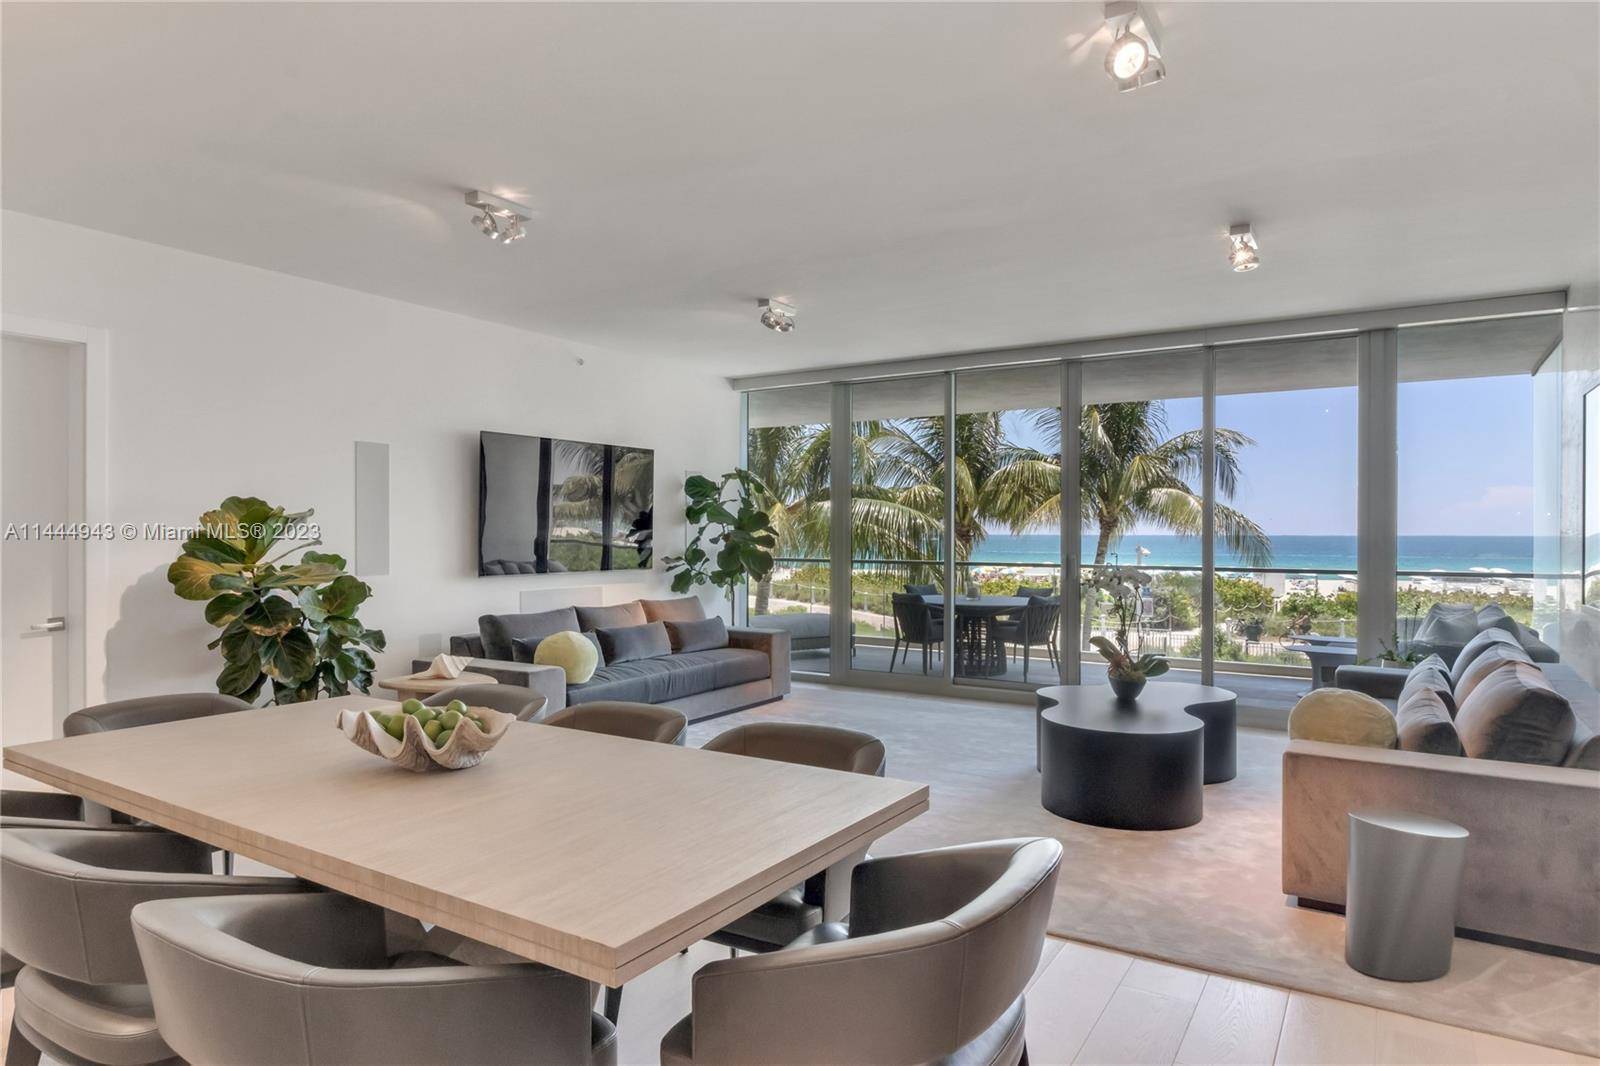 Beach House 201. This unique oceanfront home offers the perfect balance for those seeking the floor plan of a house with the conveniences of a condo.